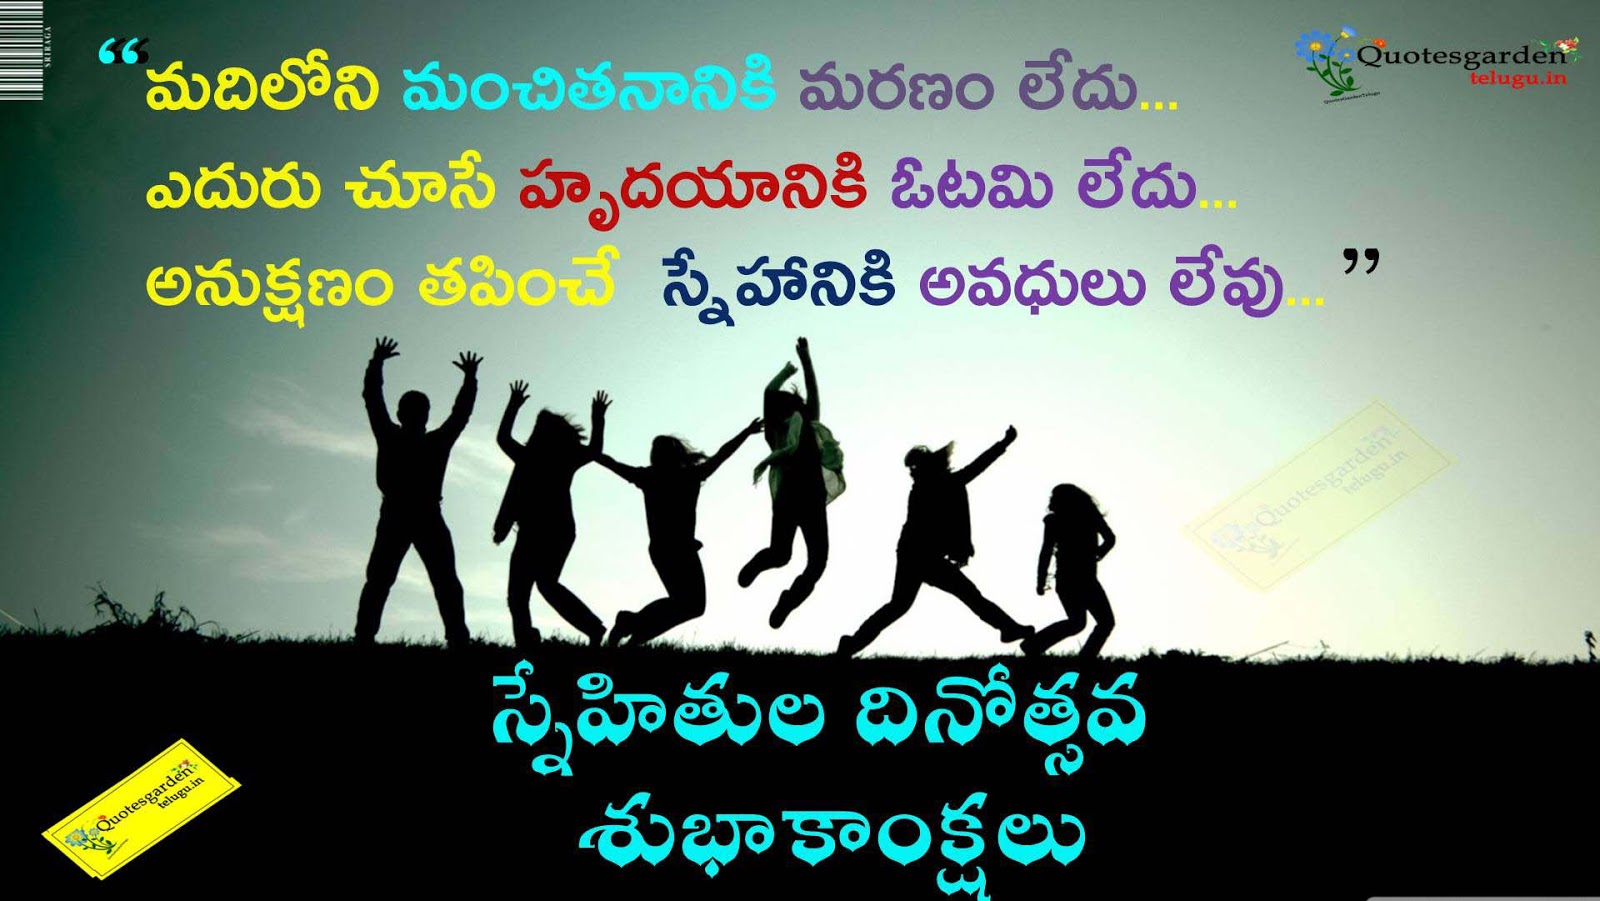 Friendship Day Quotes, Messages, Sms In Telugu - Good Morning For Group Friends - HD Wallpaper 